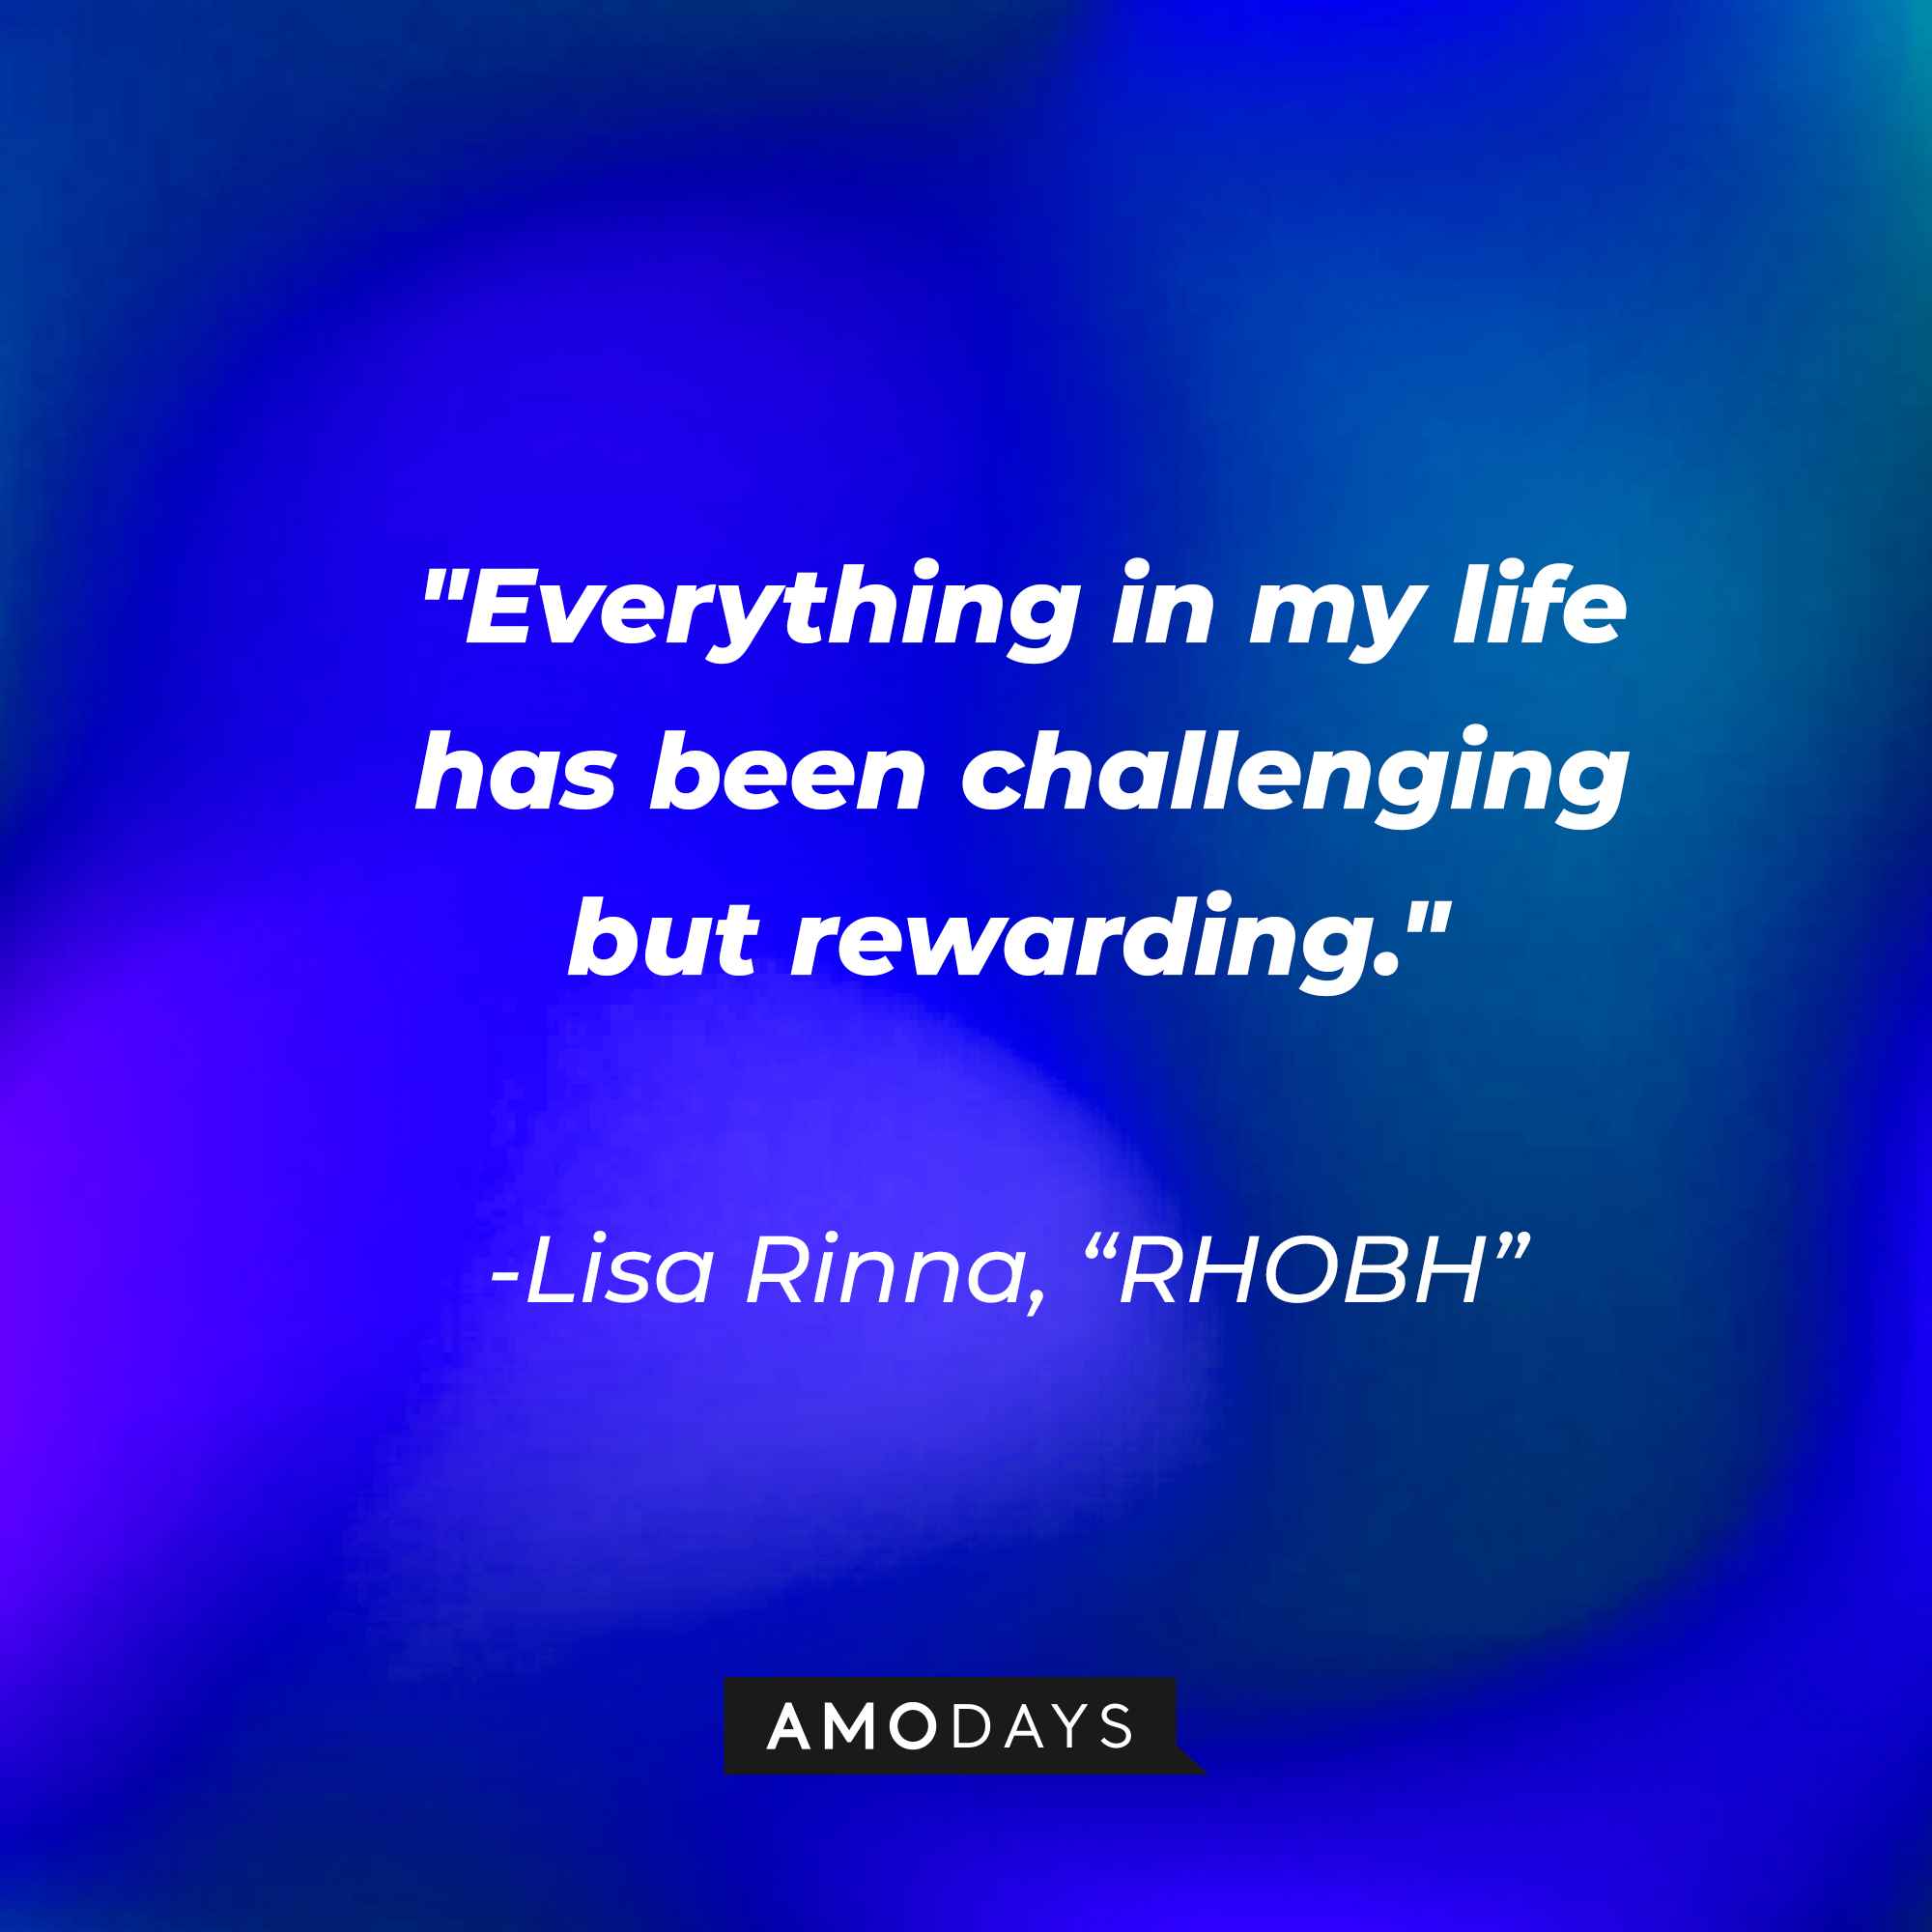 Lisa Rinna's quote from "The Real Housewives of Beverly Hills:" "Everything in my life has been challenging but rewarding." | Source: AmoDays